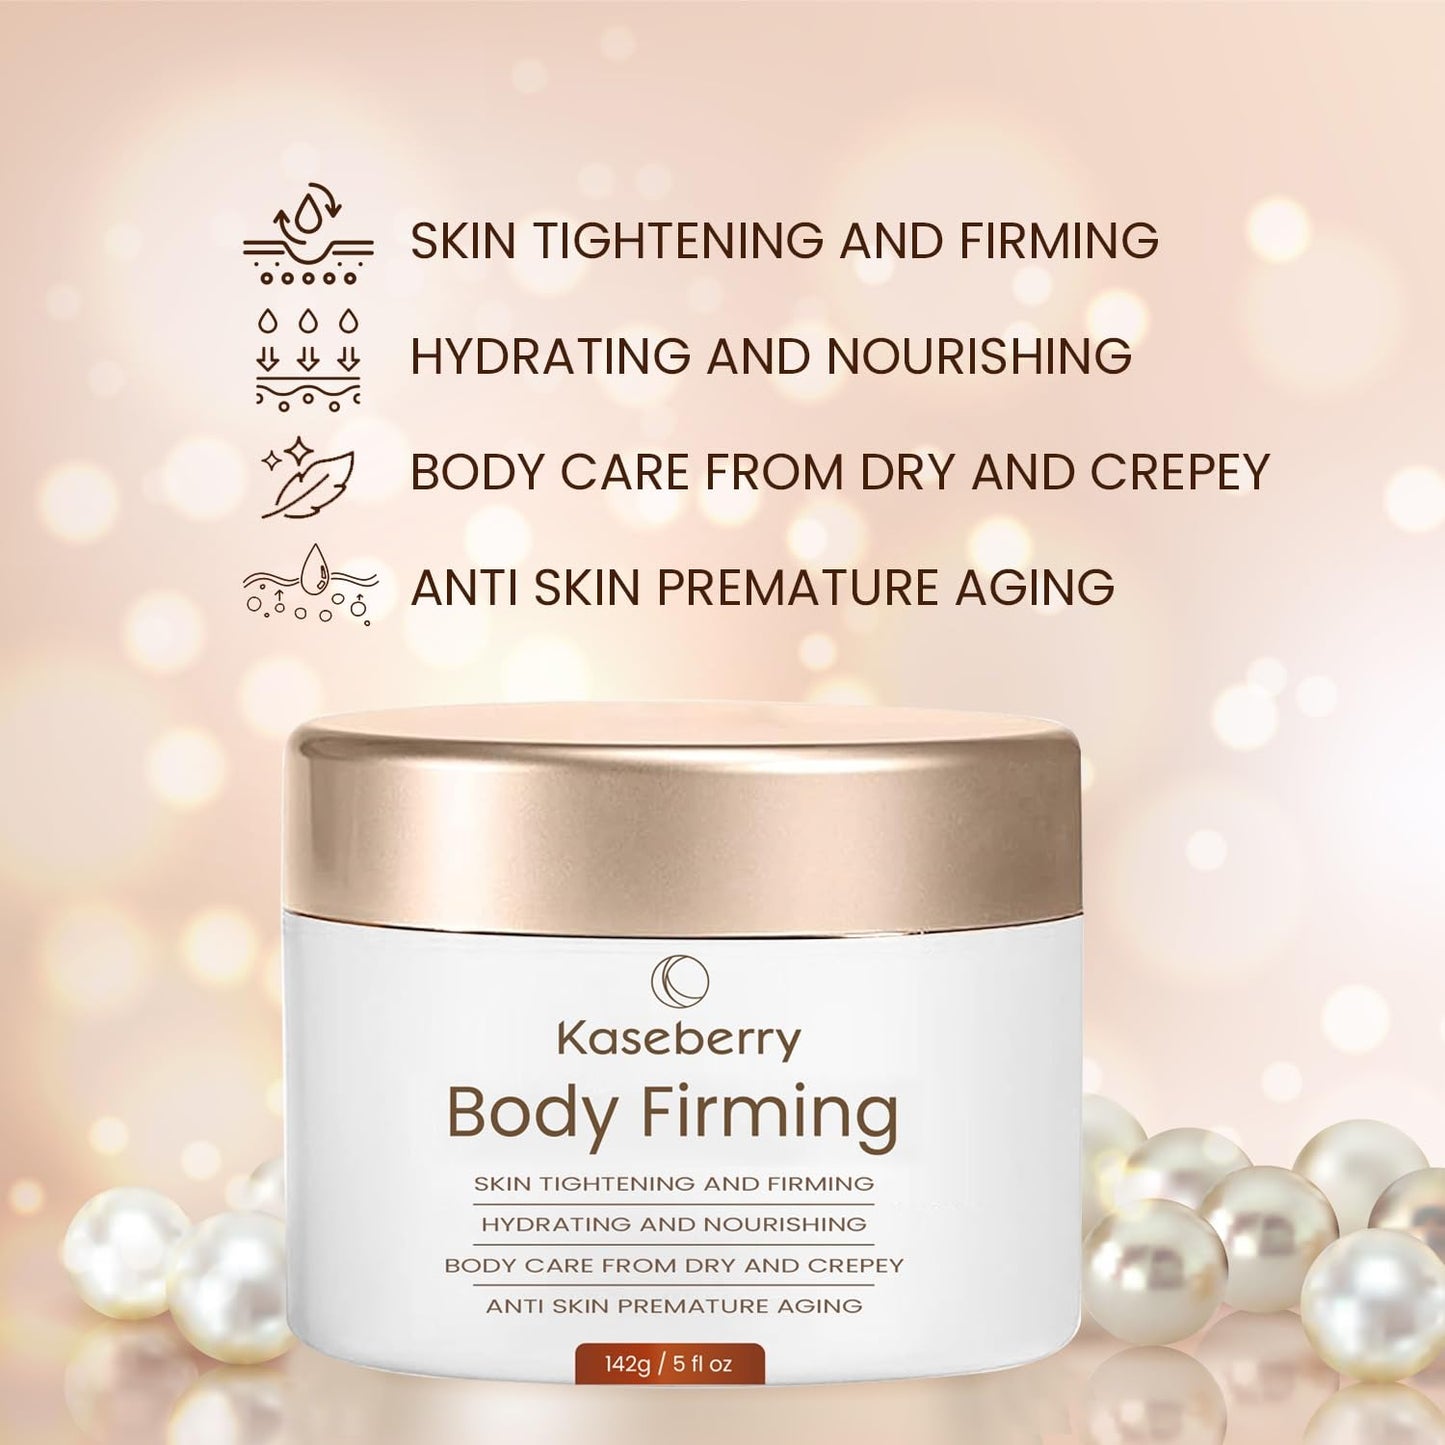 Moisturizing Body Repair Treatment: Reduce Crepey Skin and Wrinkle Visibly - Hydrating, Firming, Softening, Smooth Anti-Aging Cream For Body with Collagen and Elastin - 5 fl oz